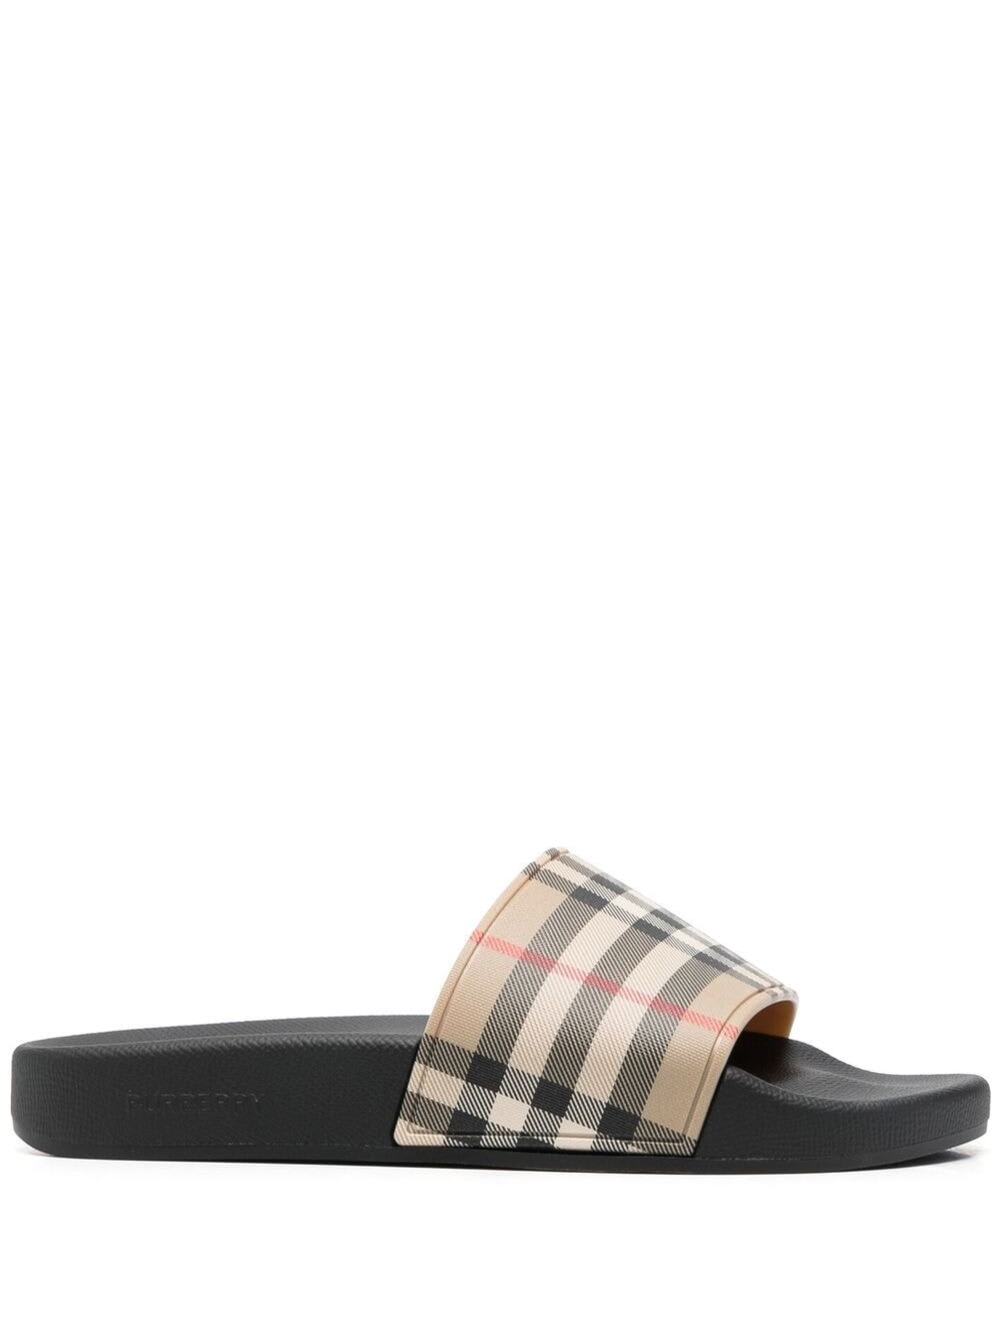 Burberry Brown Slides Sandals With Vintage Check Motif In Polyurethane